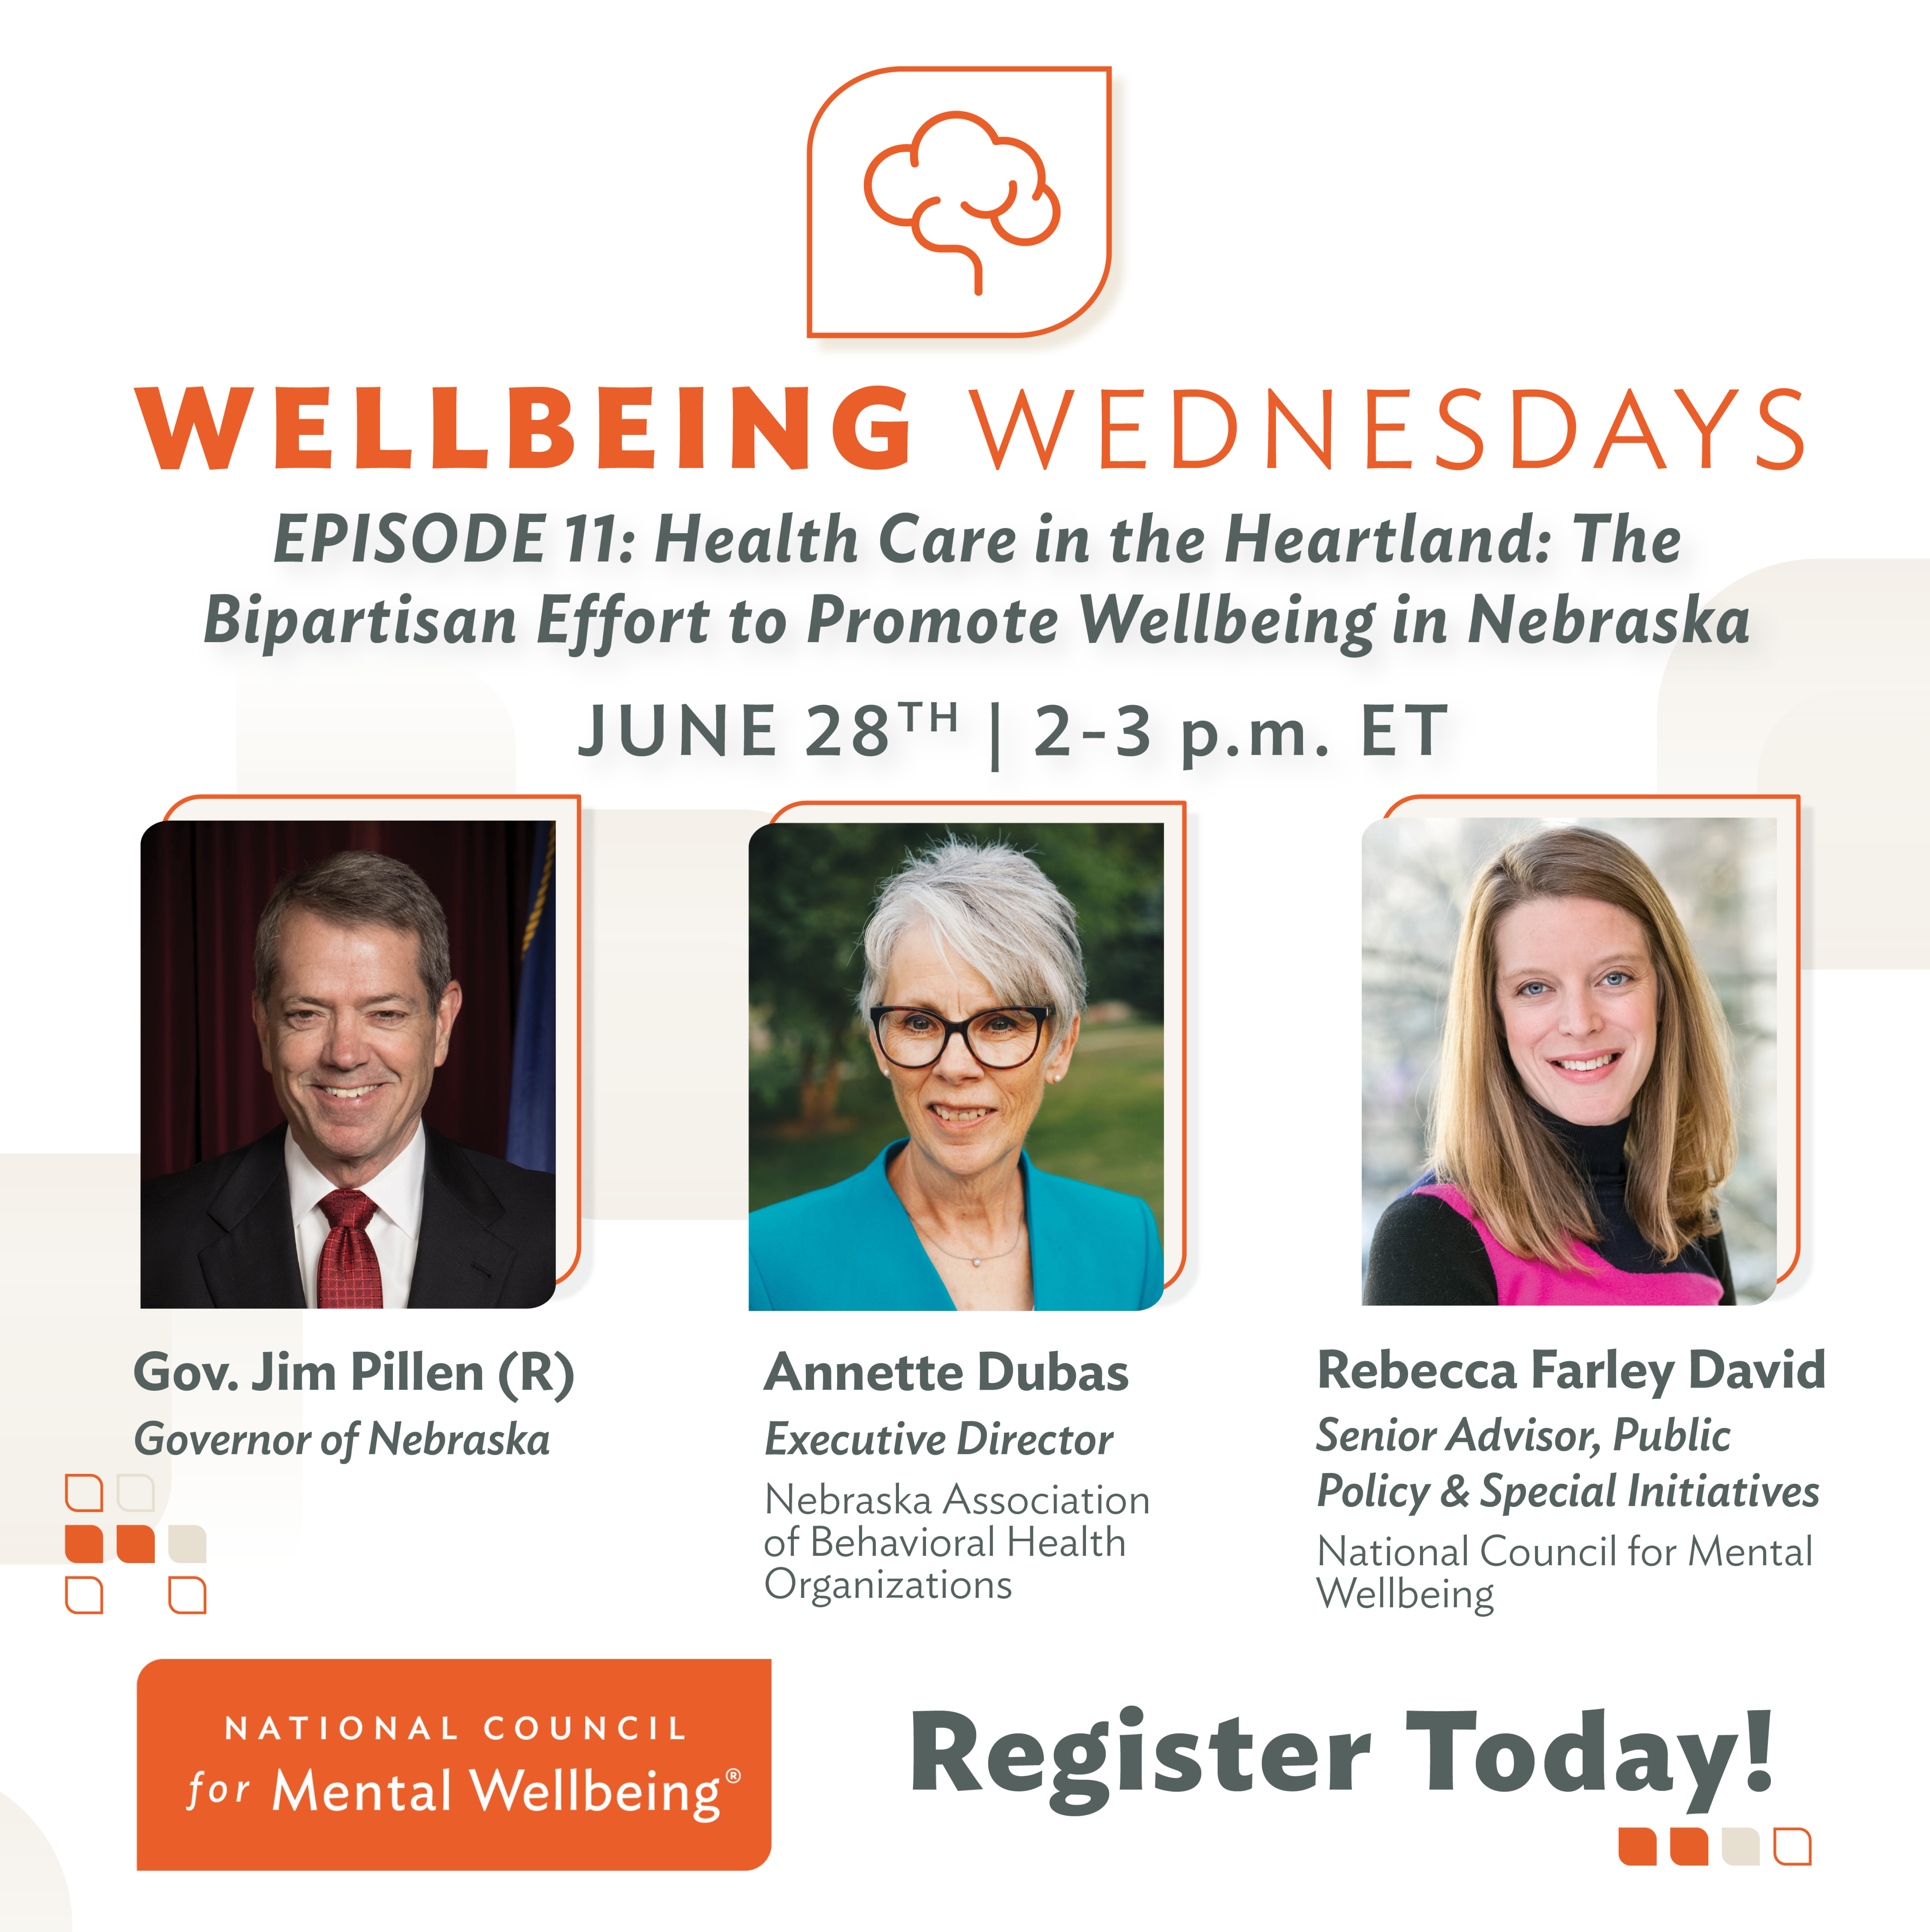 Wellbeing Wednesdays Health Care in the Heartland: The Bipartisan Effort to Promote Wellbeing in Nebraska